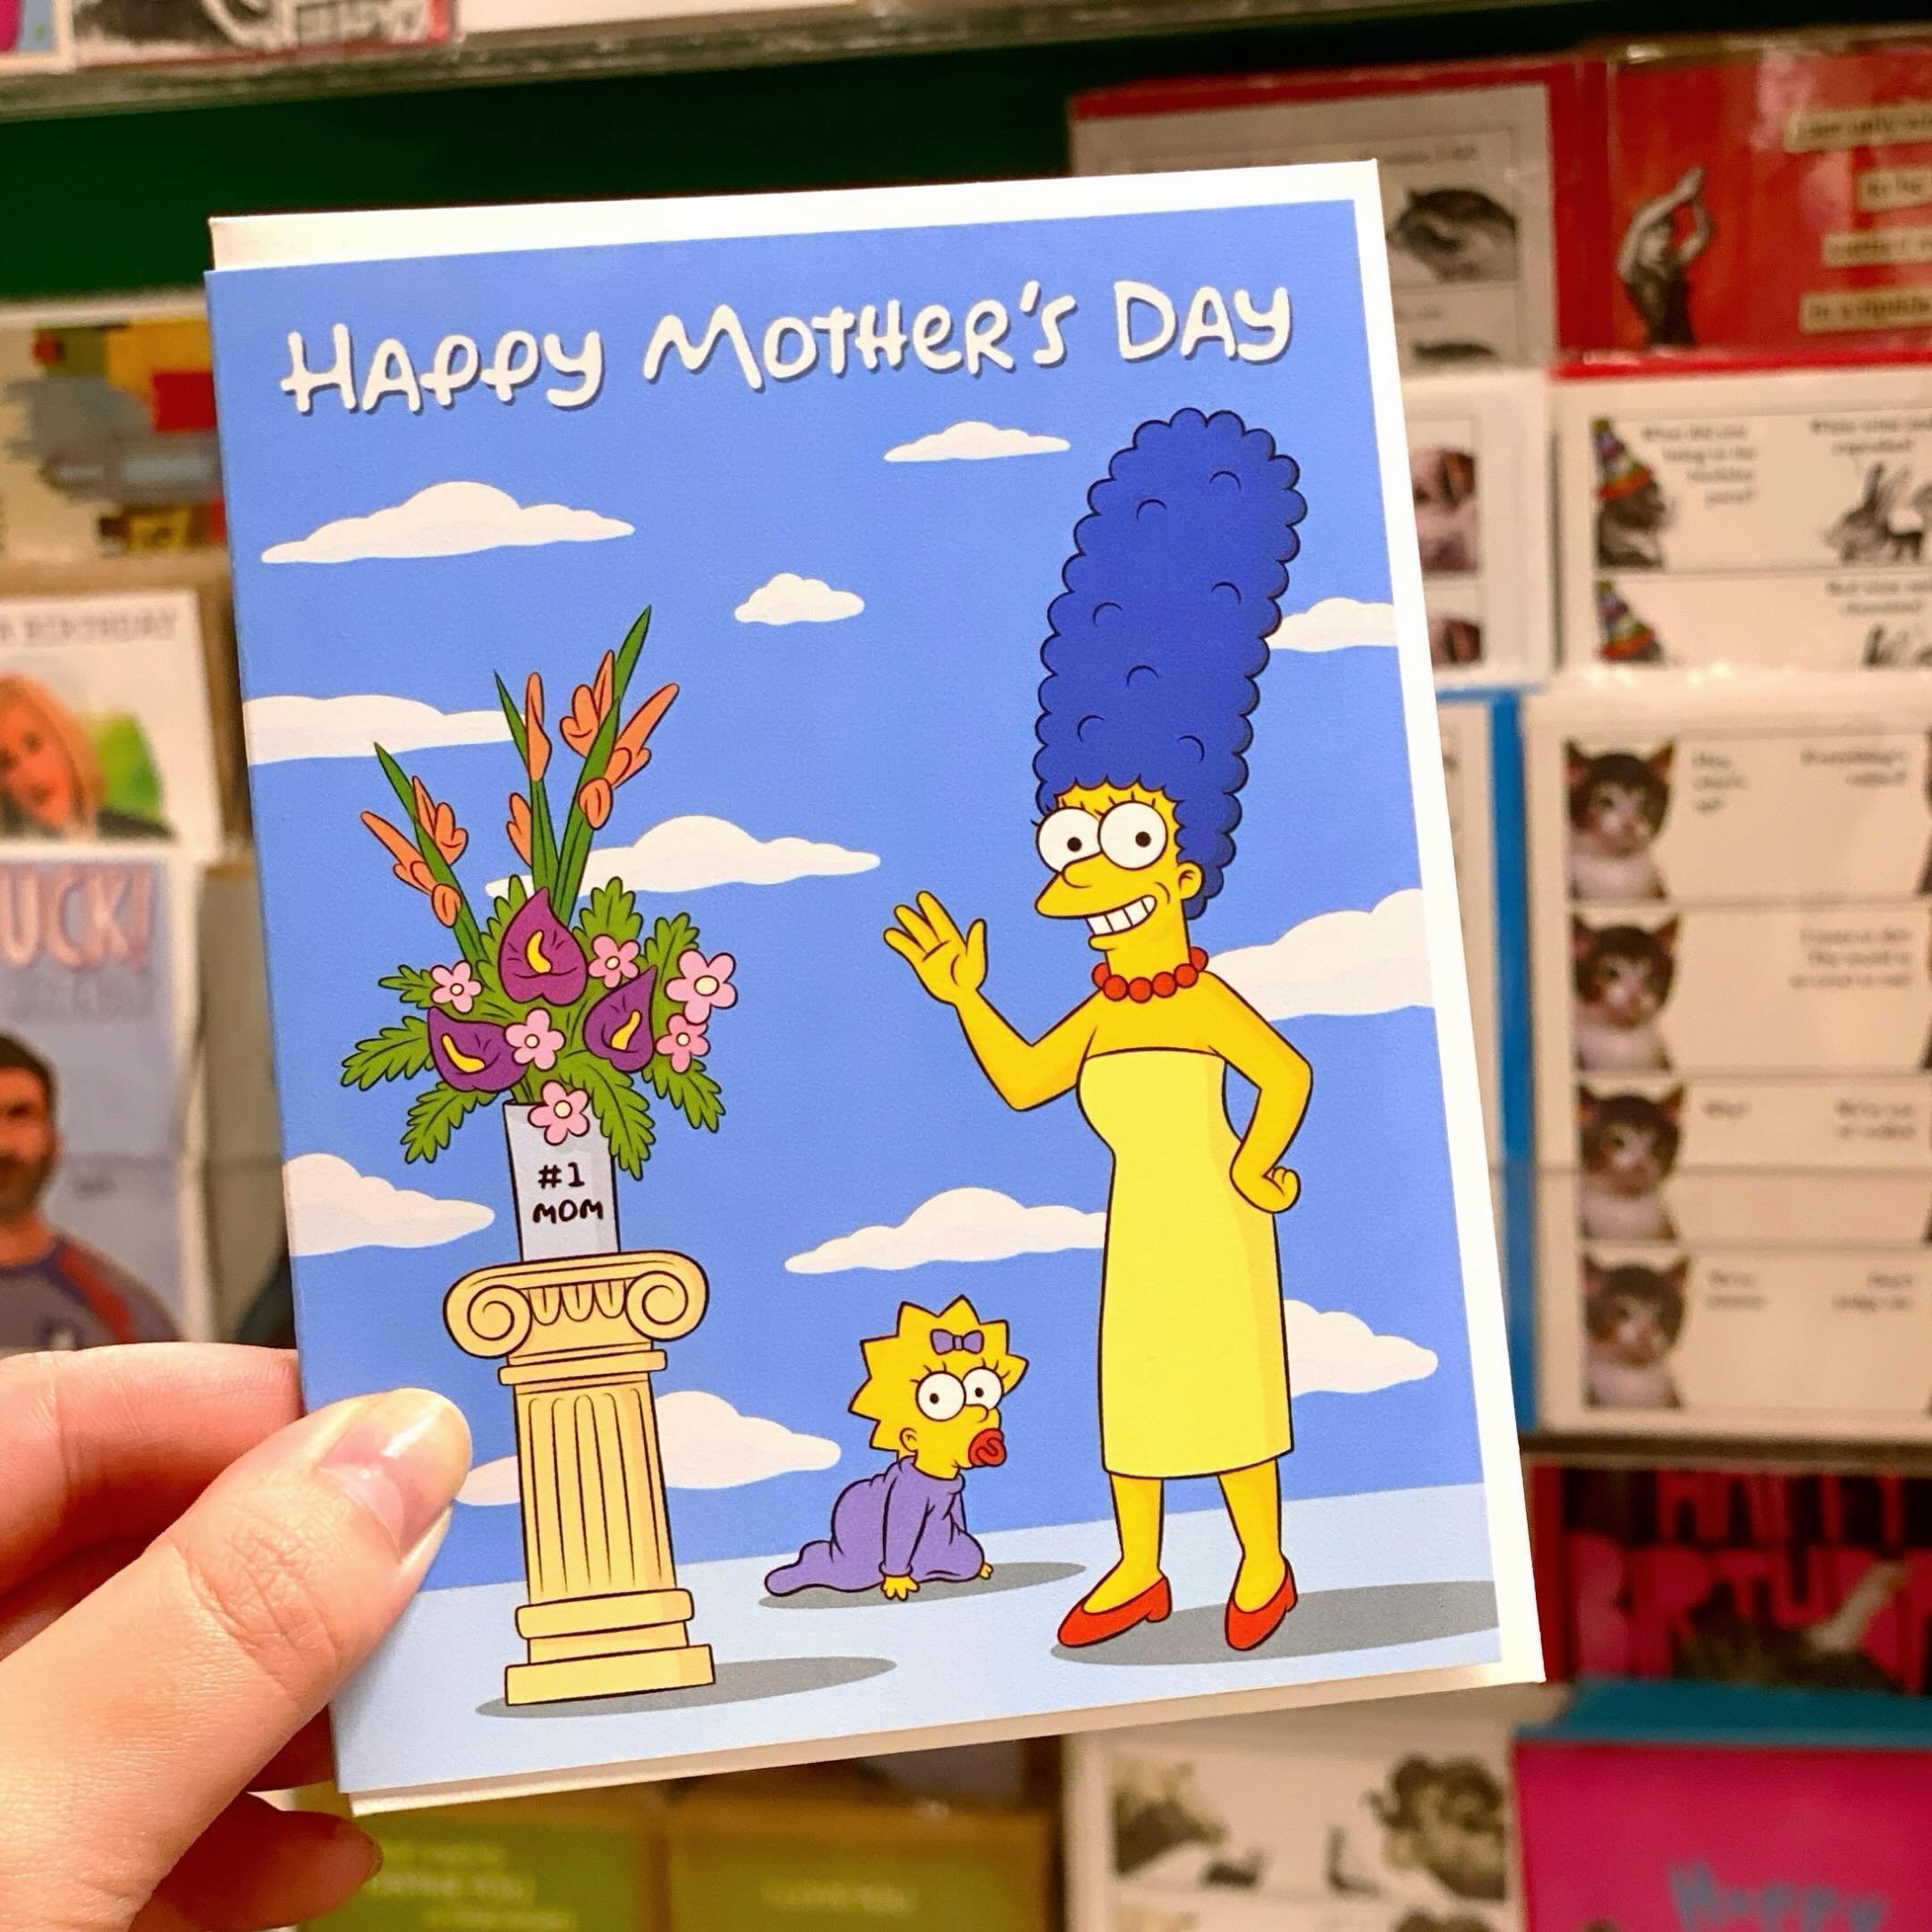 If you didn&rsquo;t already know, we&rsquo;re huge fans of @thefound and of The Simpsons, so this Mother&rsquo;s Day card is pretty much perfect 😘